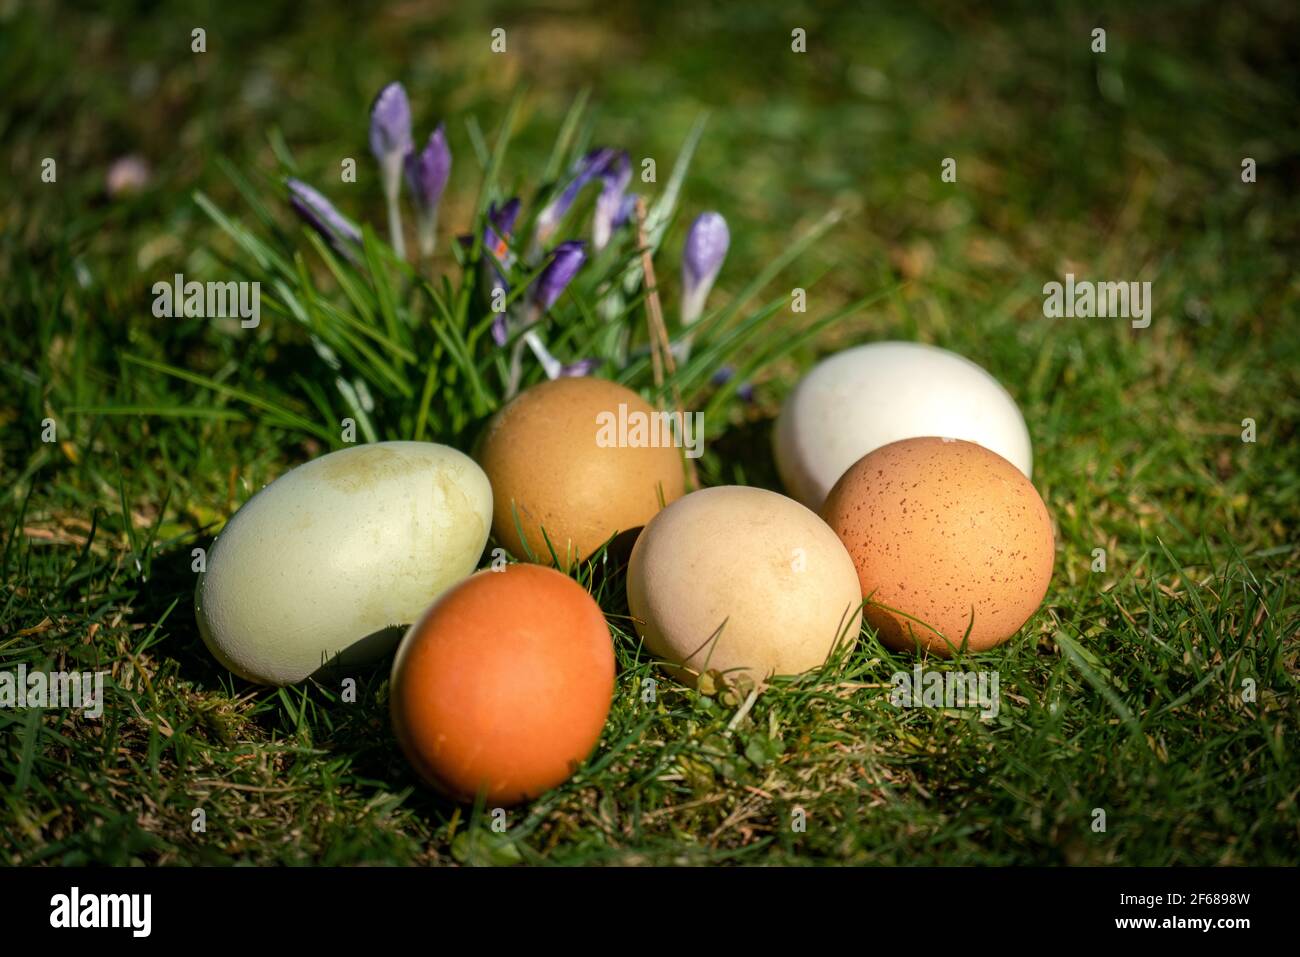 Six different coloured free range organic eggs on a lawn in spring sunshine with spring flowers in the background Stock Photo